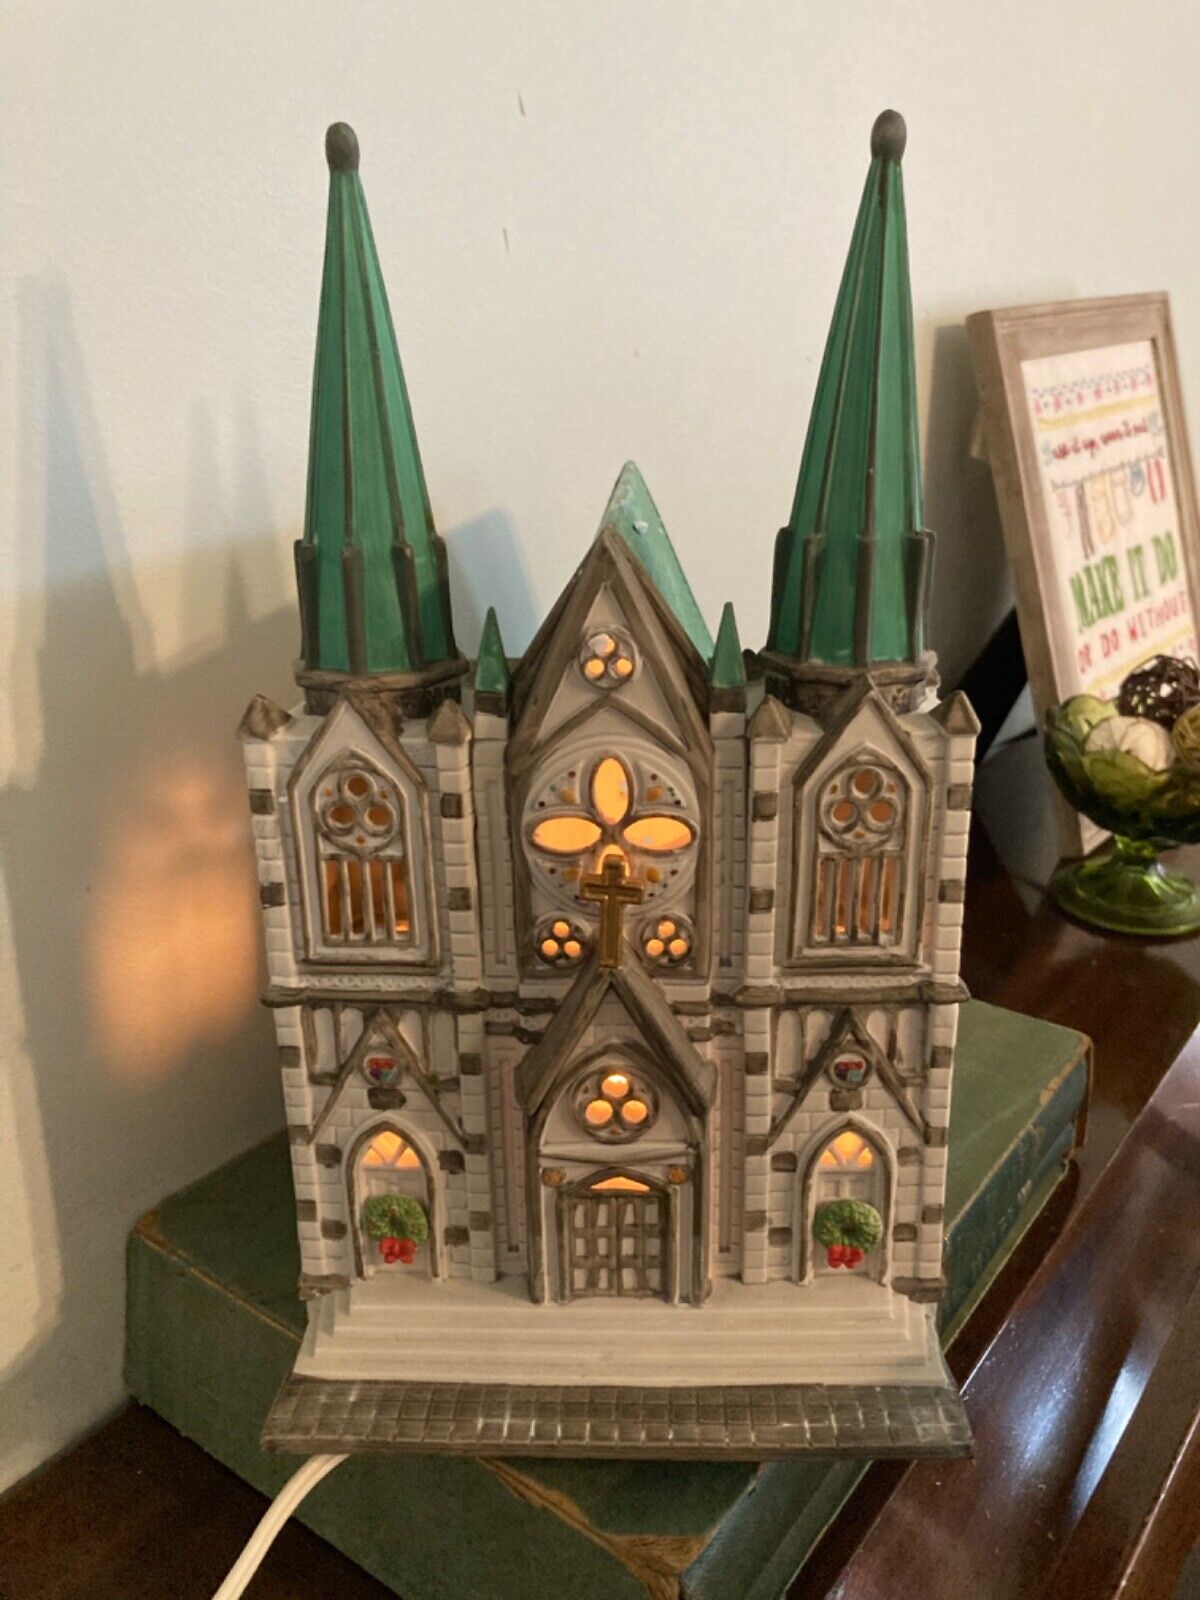 Dept 56 Christmas In The City Series The Cathedral 1987 in box and working light